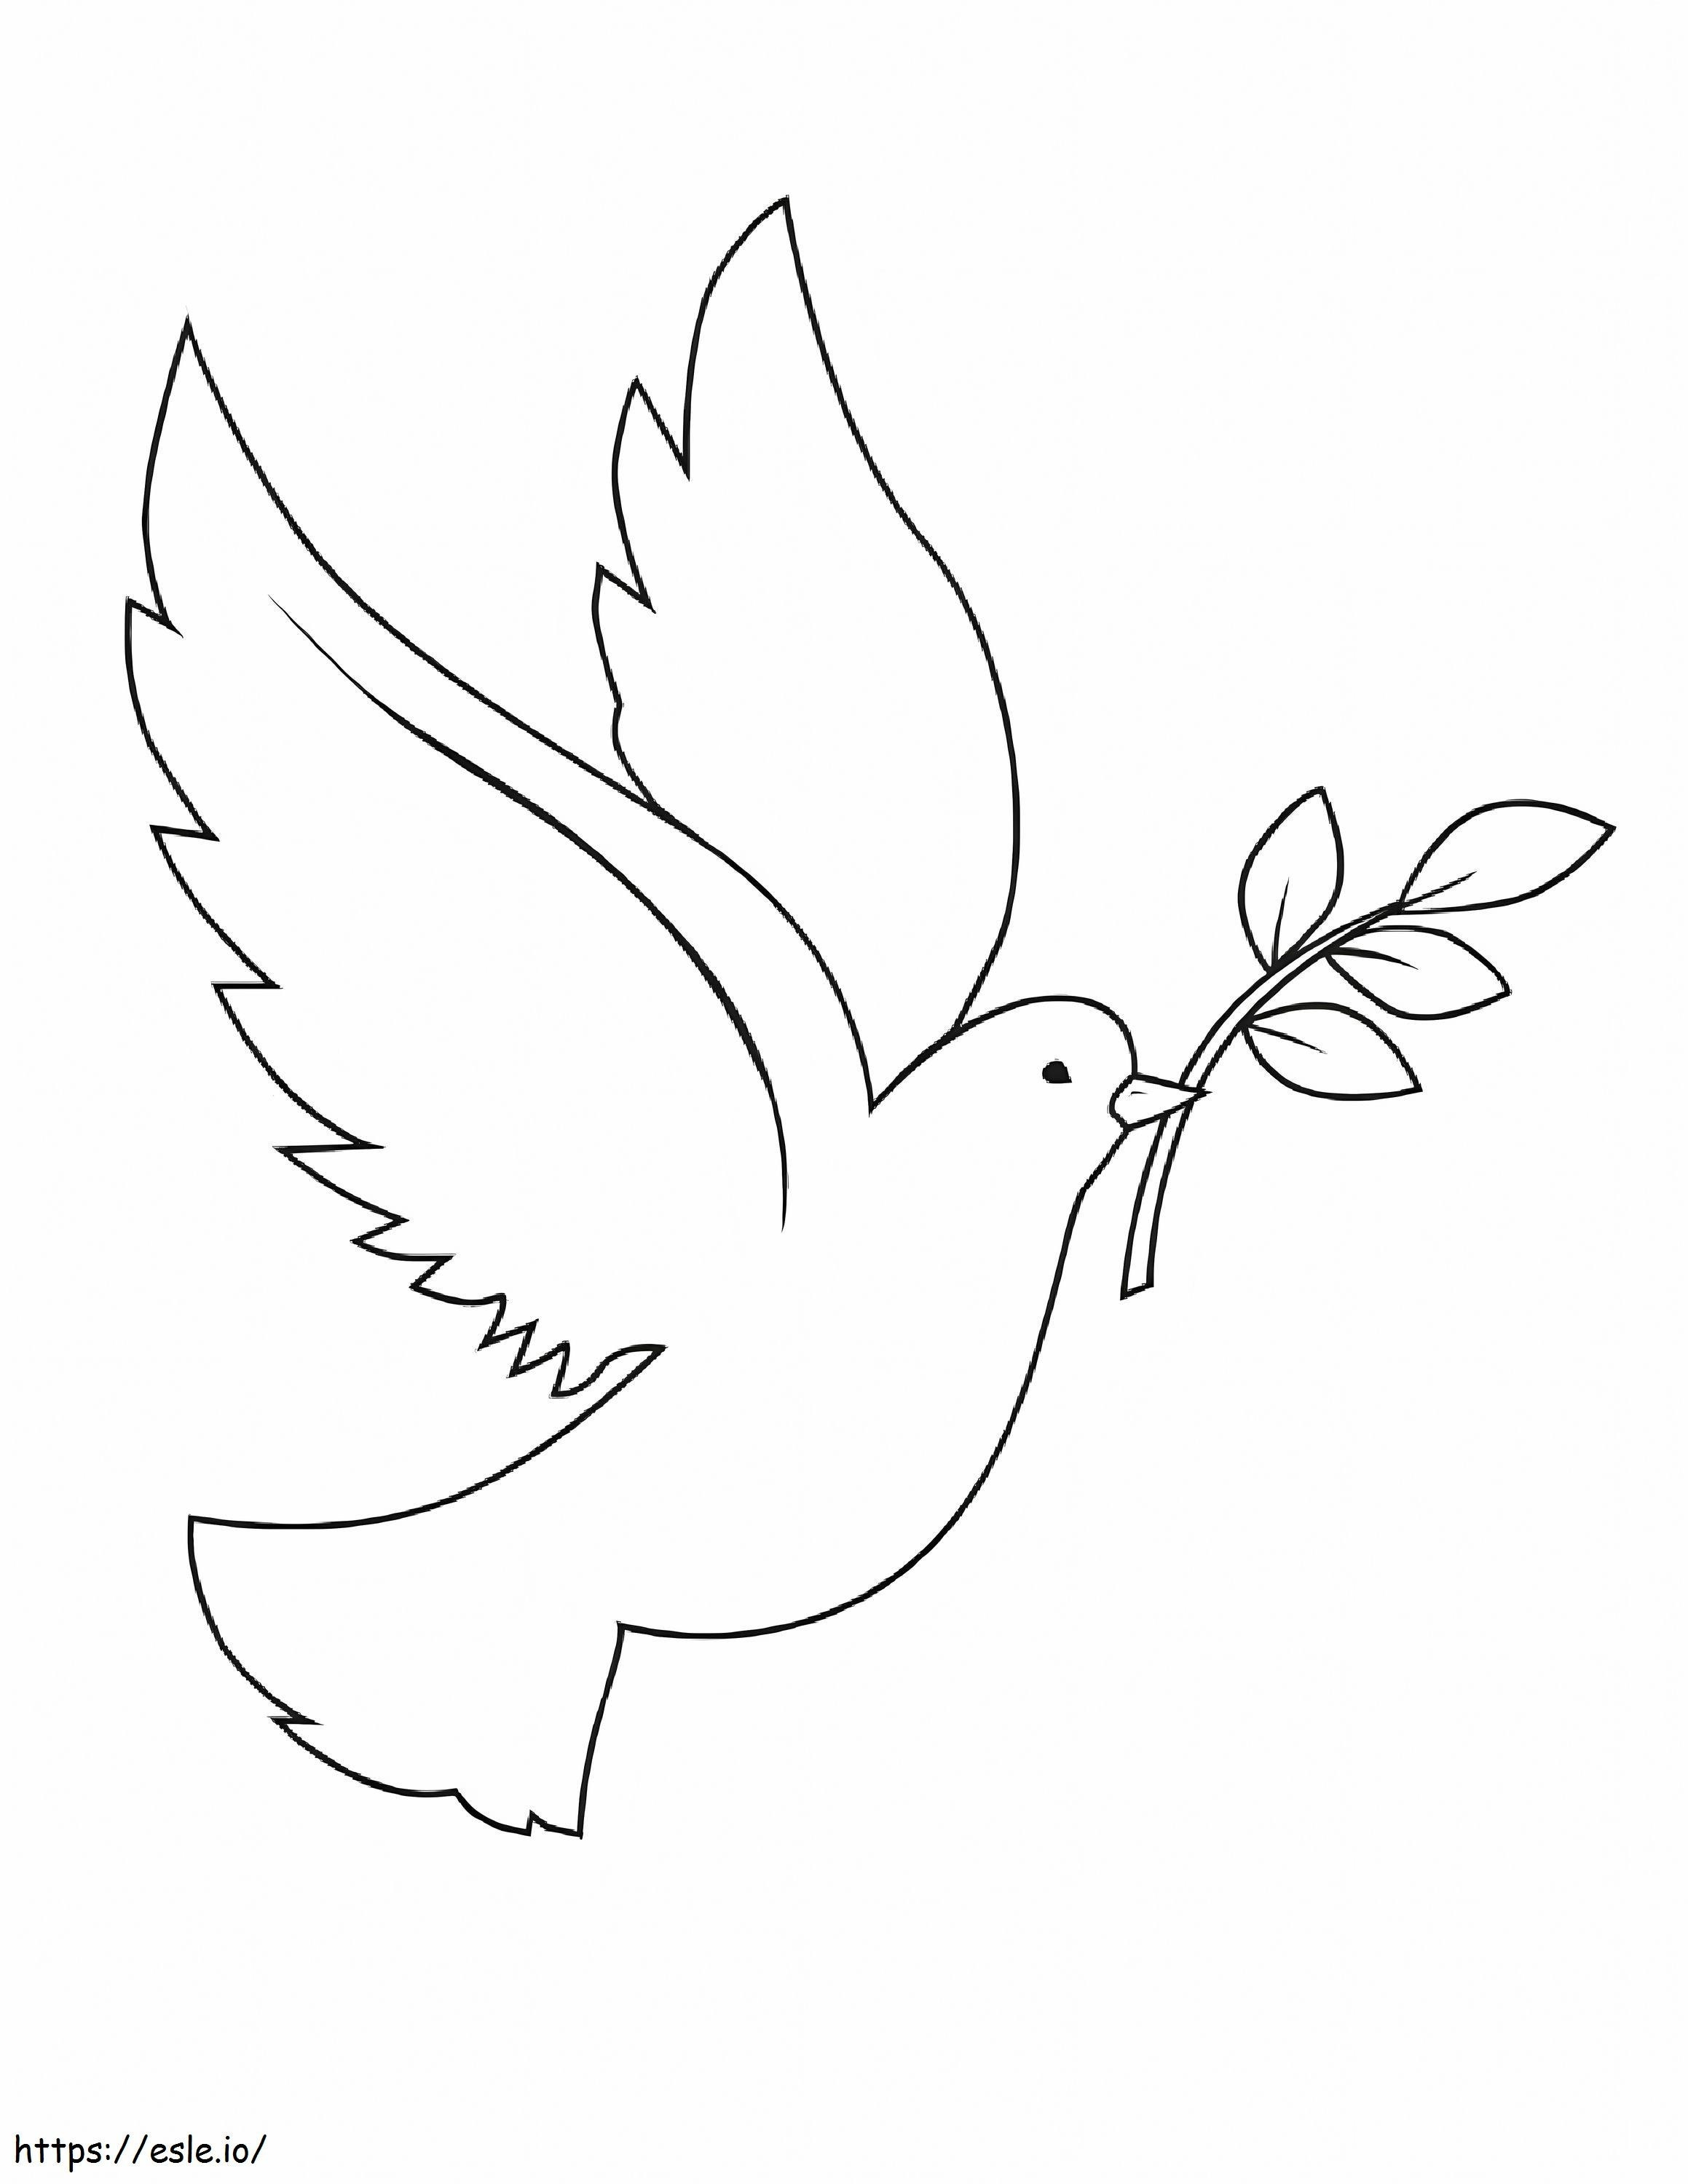 Pigeon With Small Branch On Its Beak coloring page